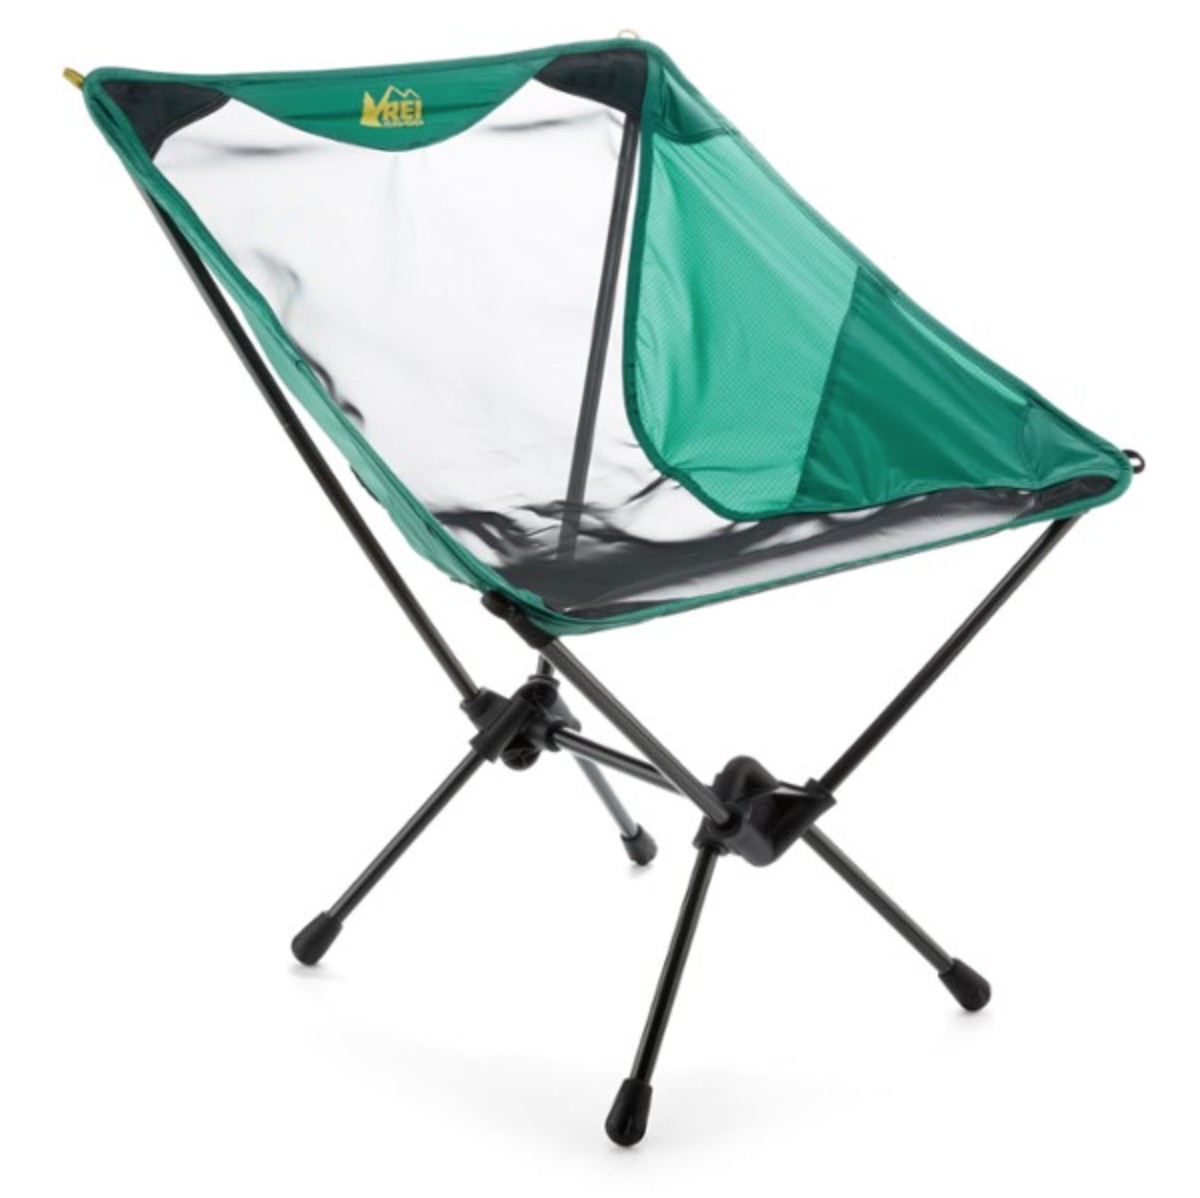 rei co-op flexlite camping chair review